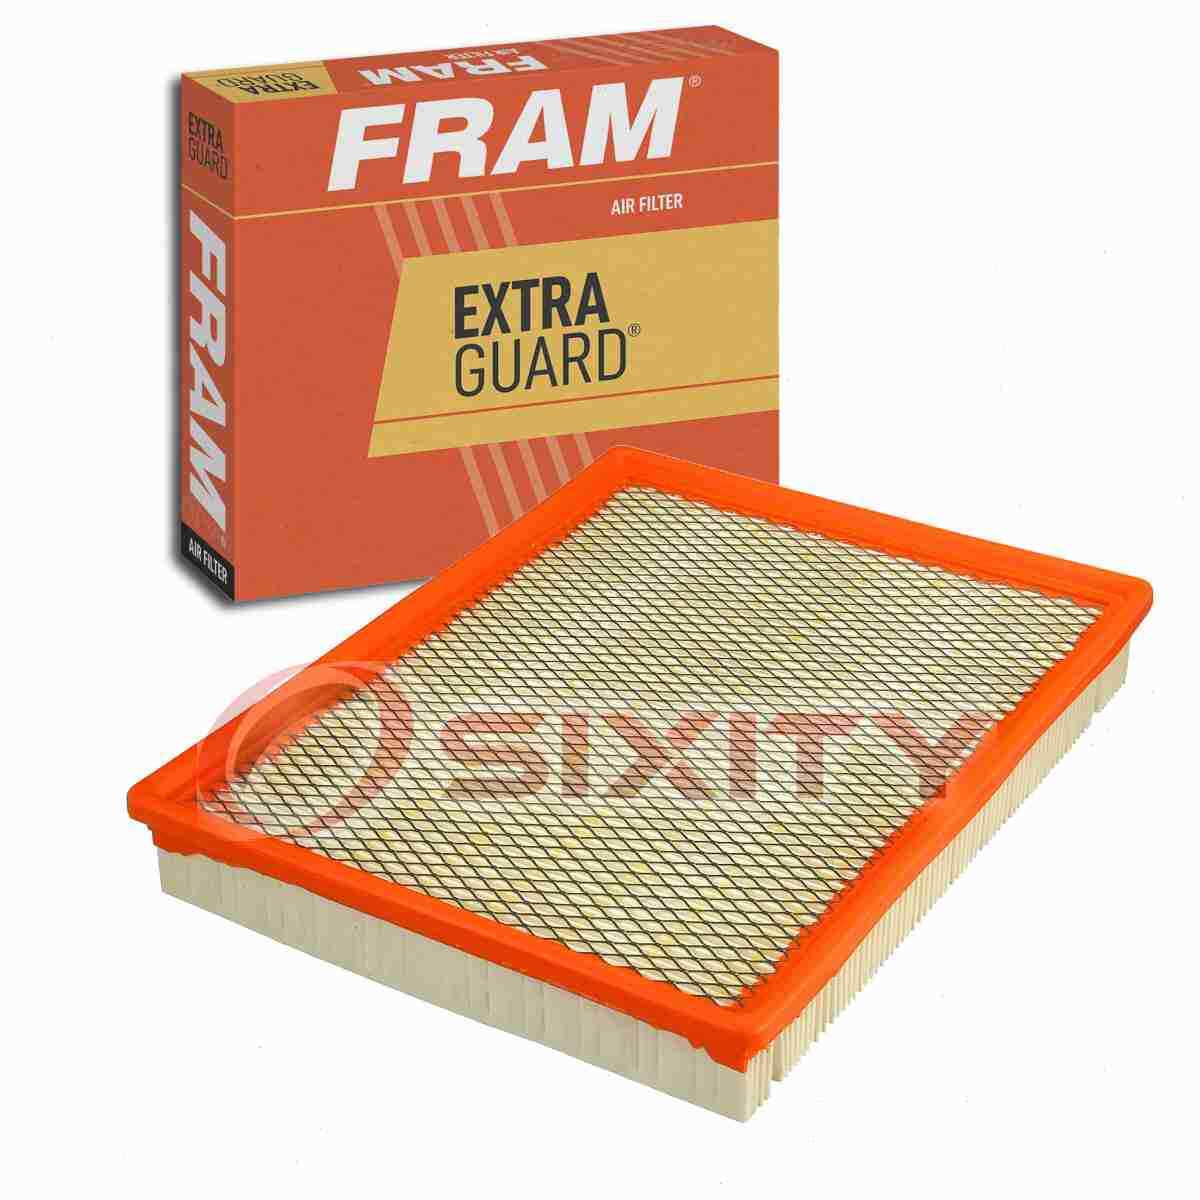 FRAM Extra Guard Air Filter for 1986-1992 Lincoln Mark VII Intake Inlet xn